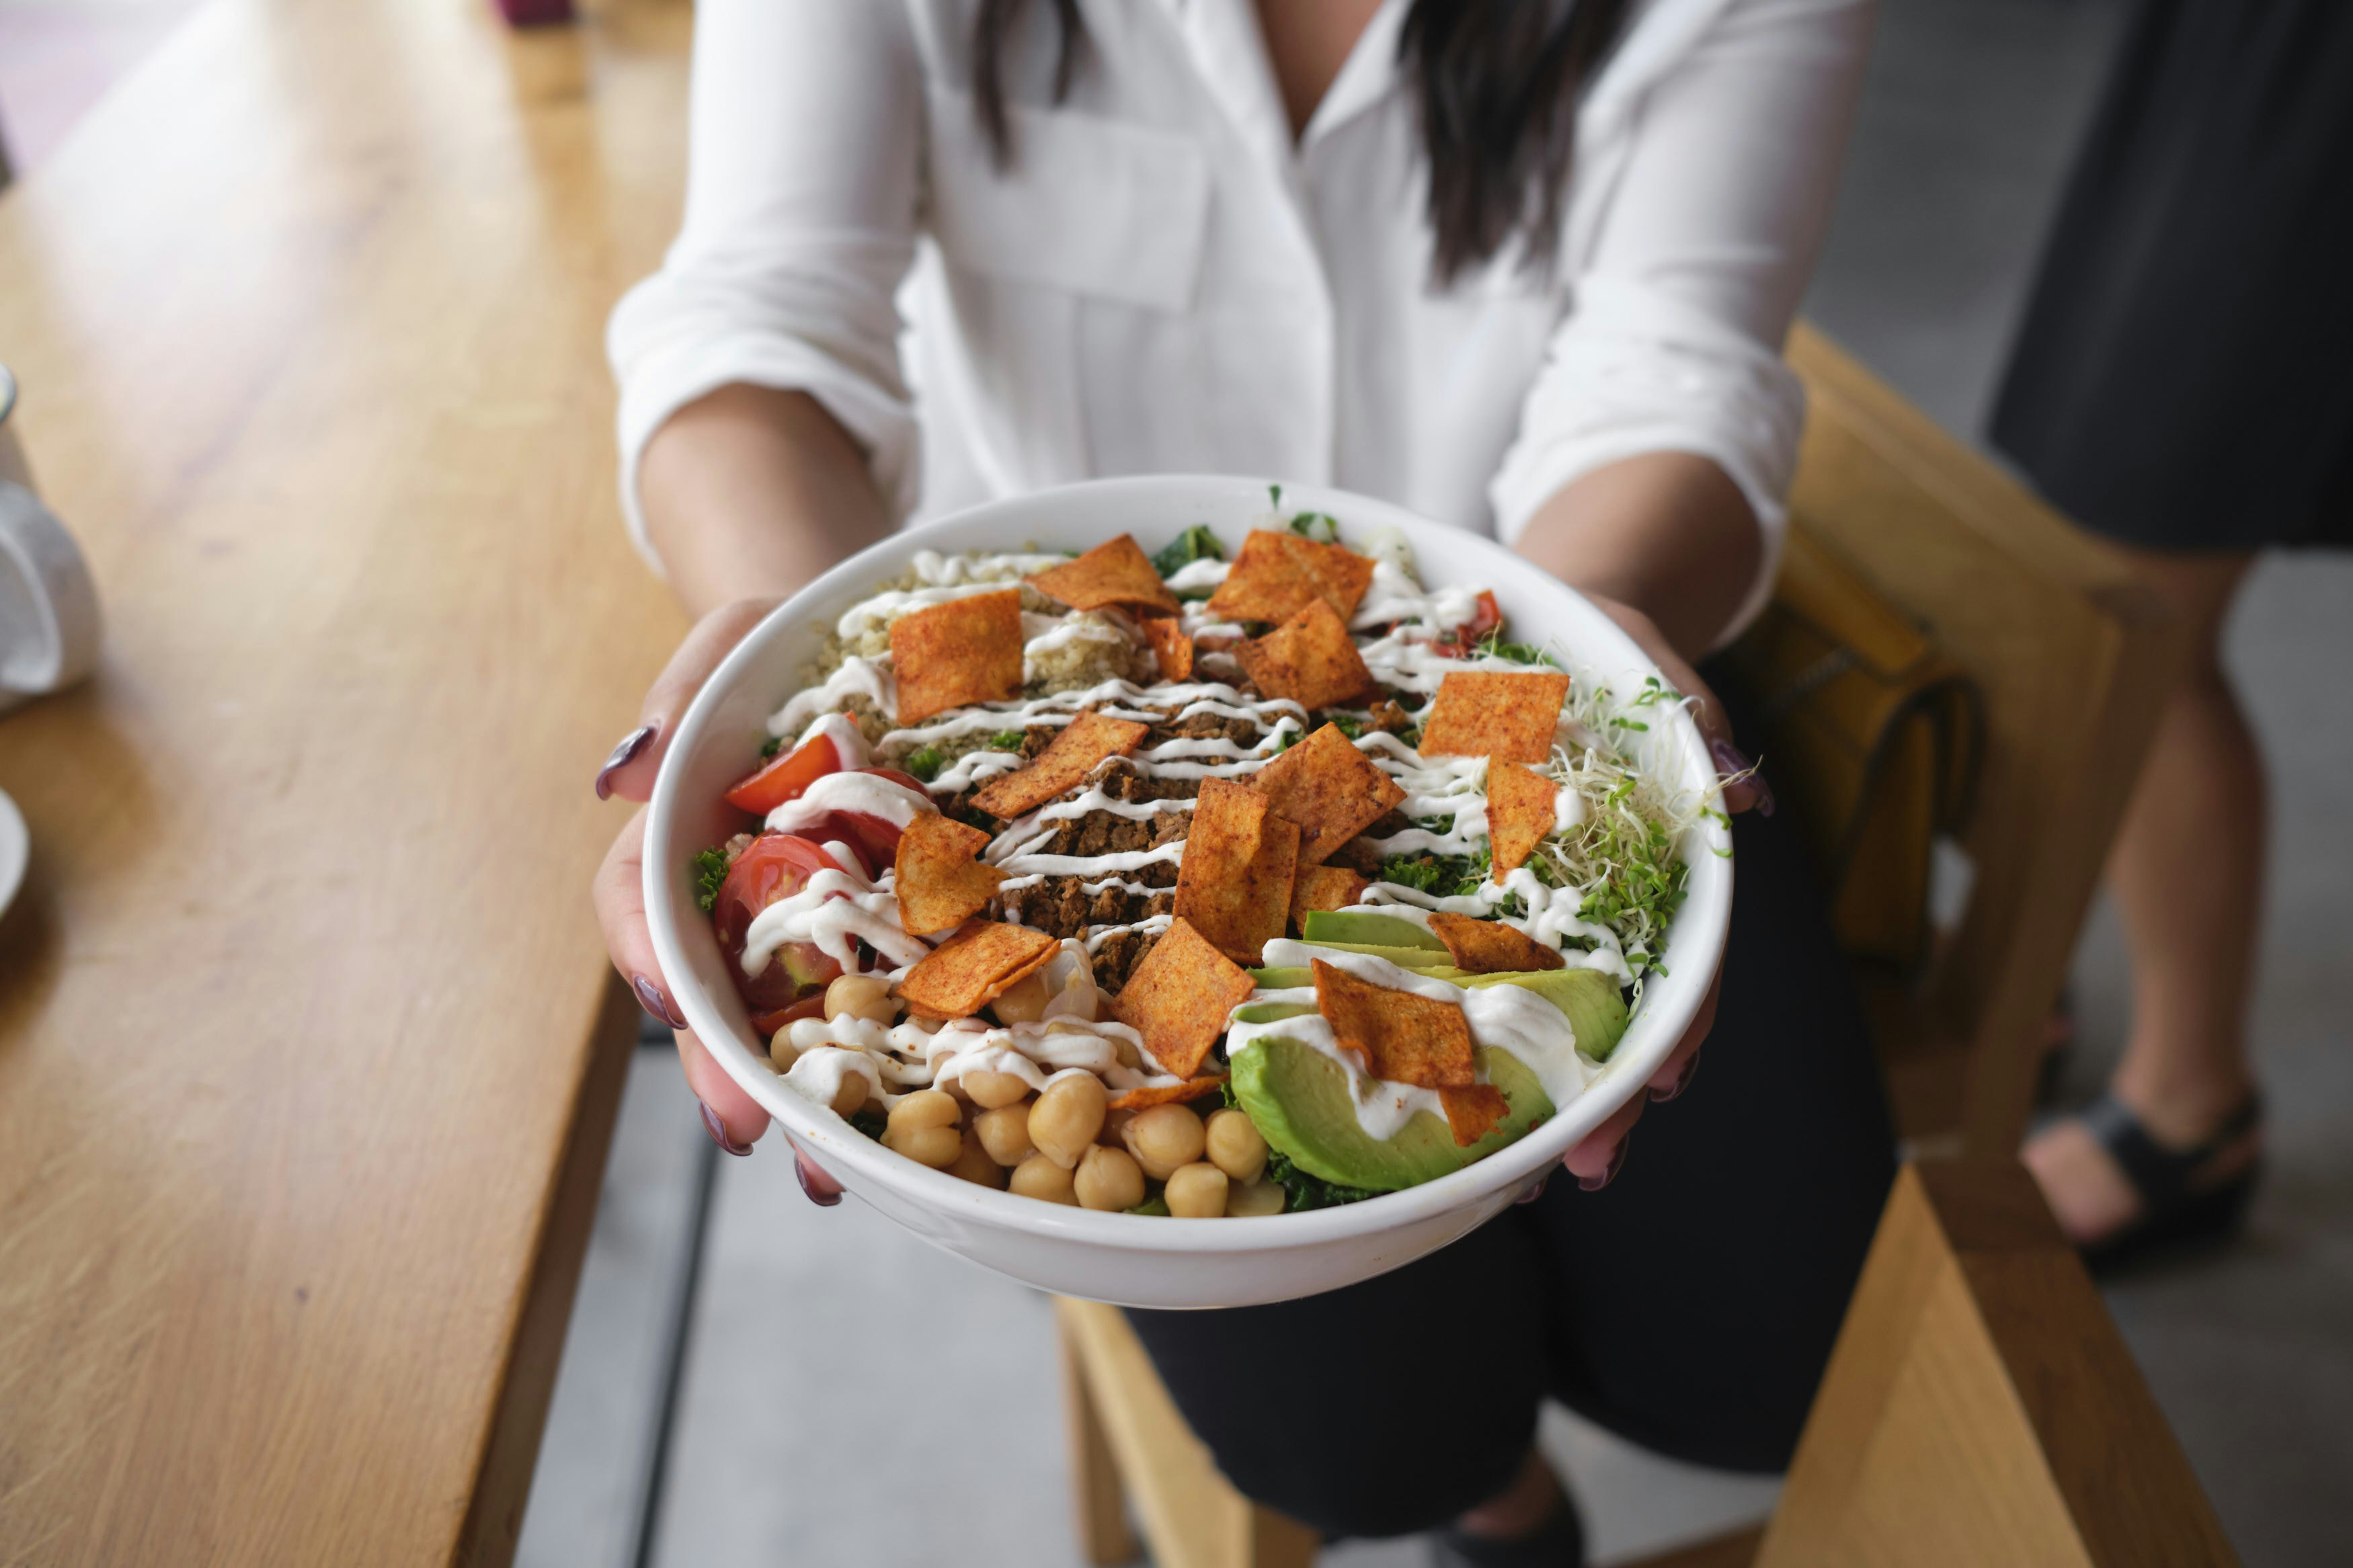 A person holds a bowl filled with chick peas, tomatoes, avocado and other veggies is topped with a white sauce; vegan restaurant miami 